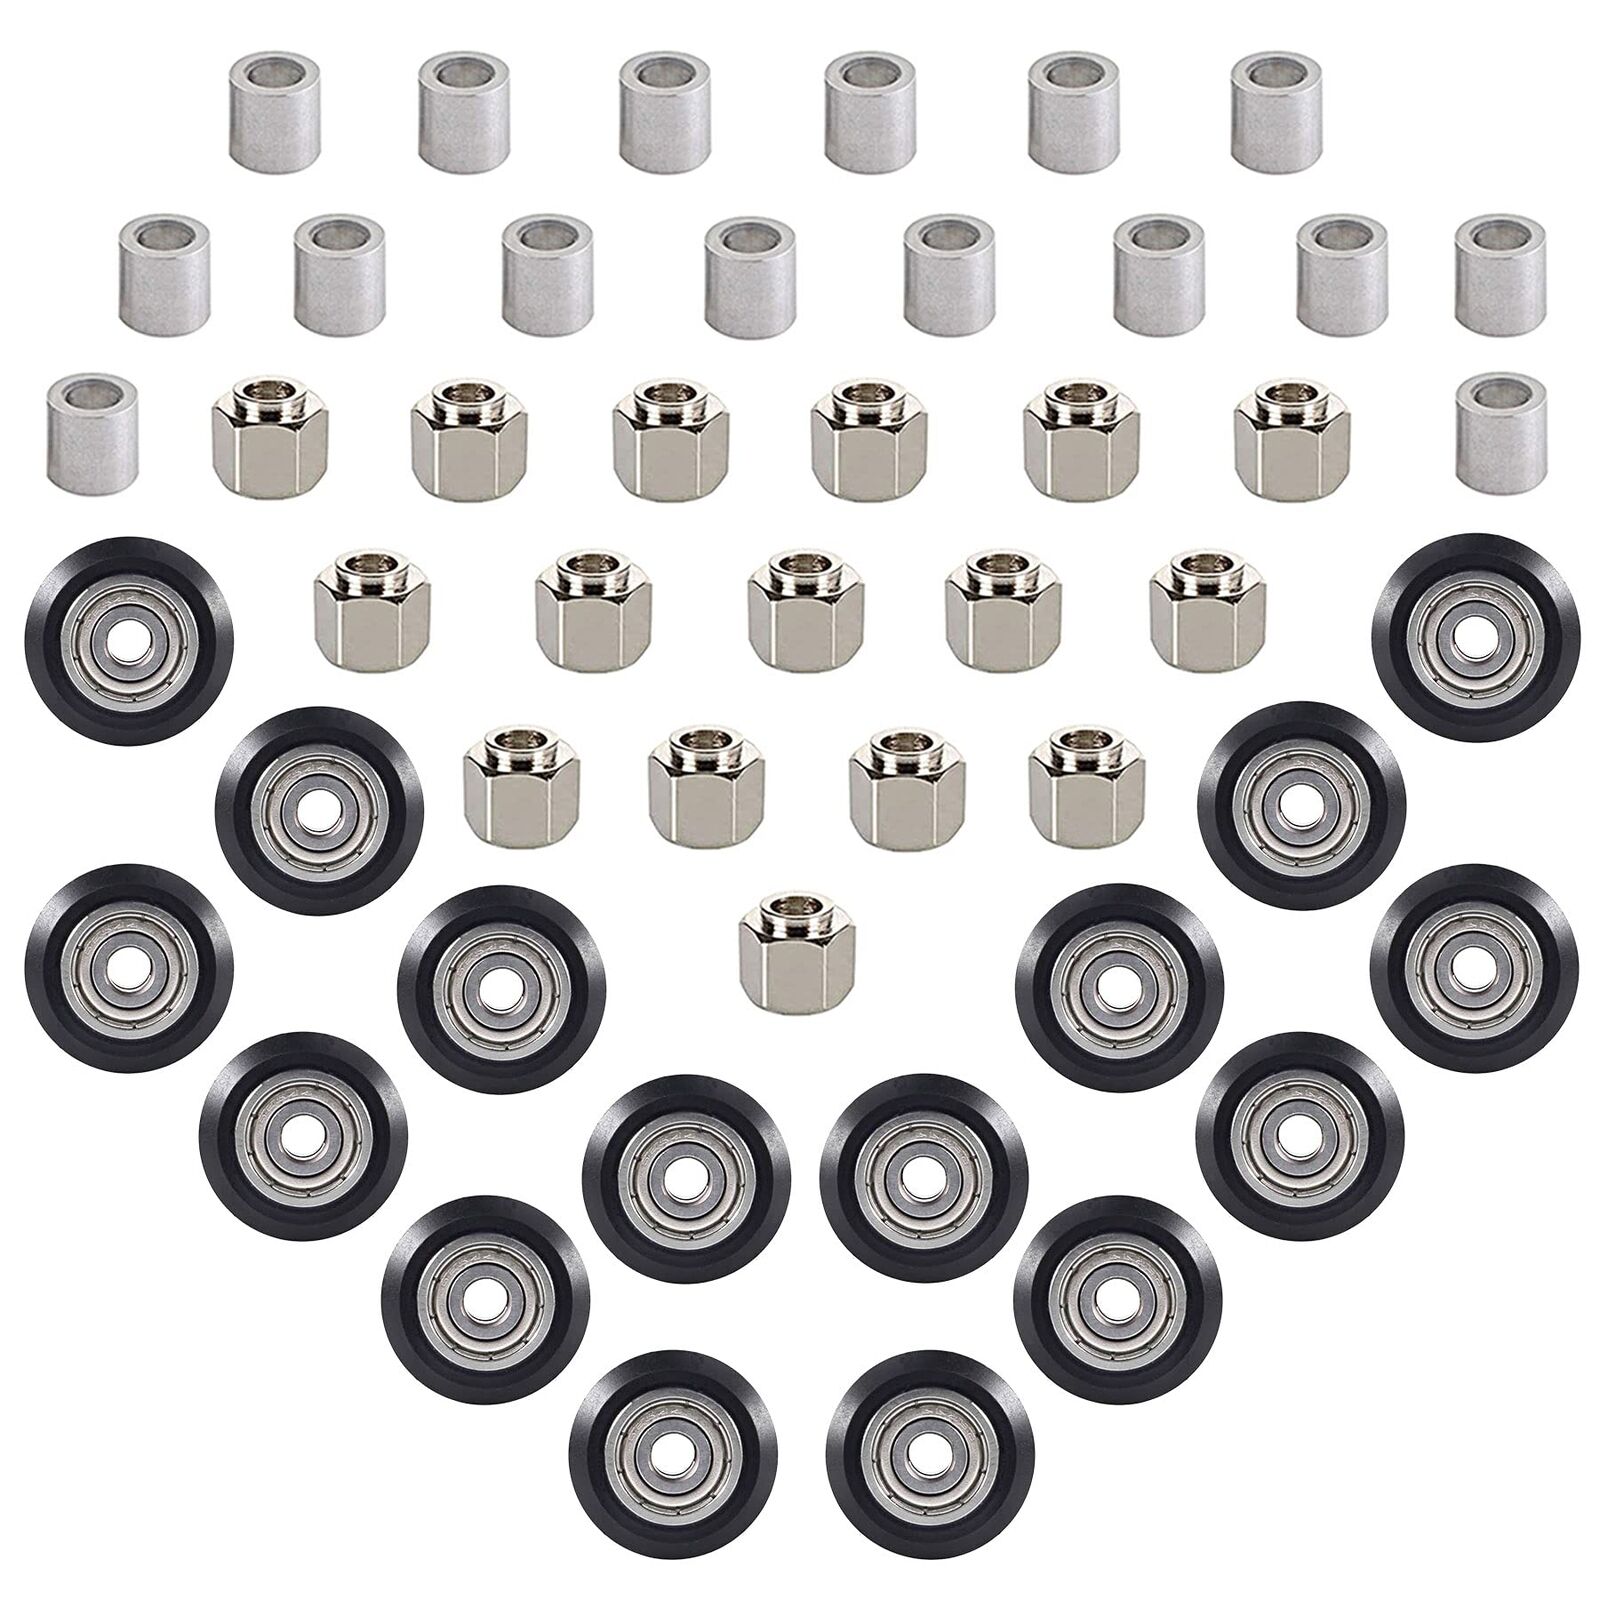 3D Printer POM Pulley Wheel Roller Printer Bearing 48pcs With Eccentric Spacer